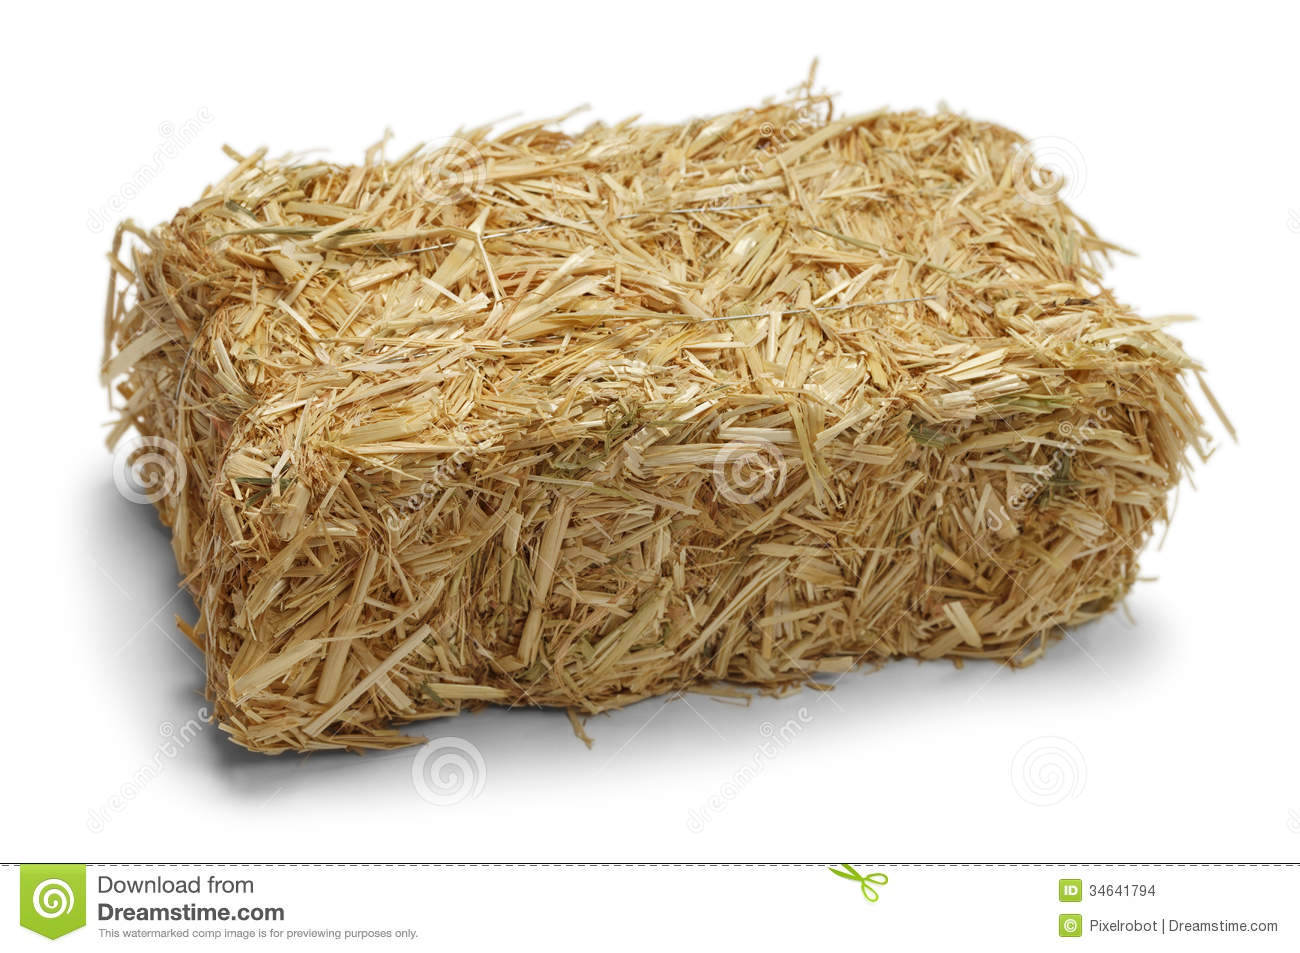 Hay Bale Stock Images   Image  34641794